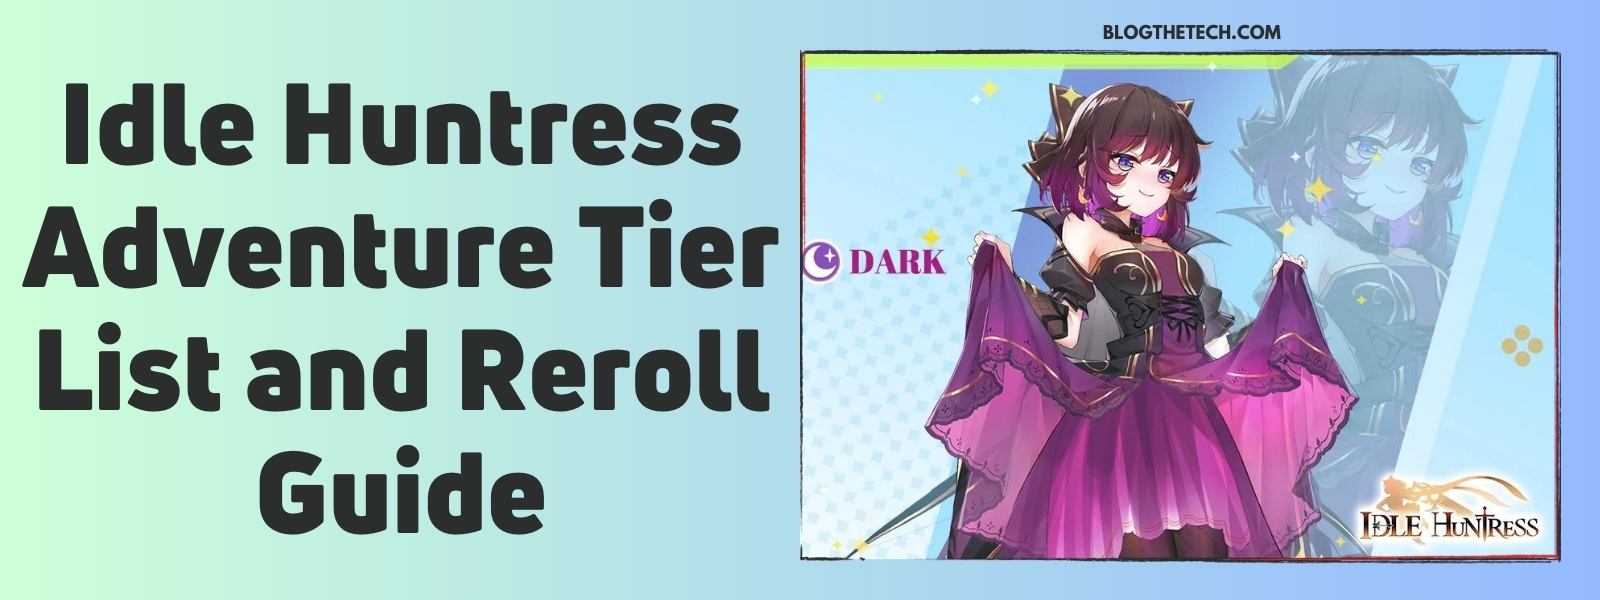 idle-huntress-adventure-tier-list-reroll-guide-featured